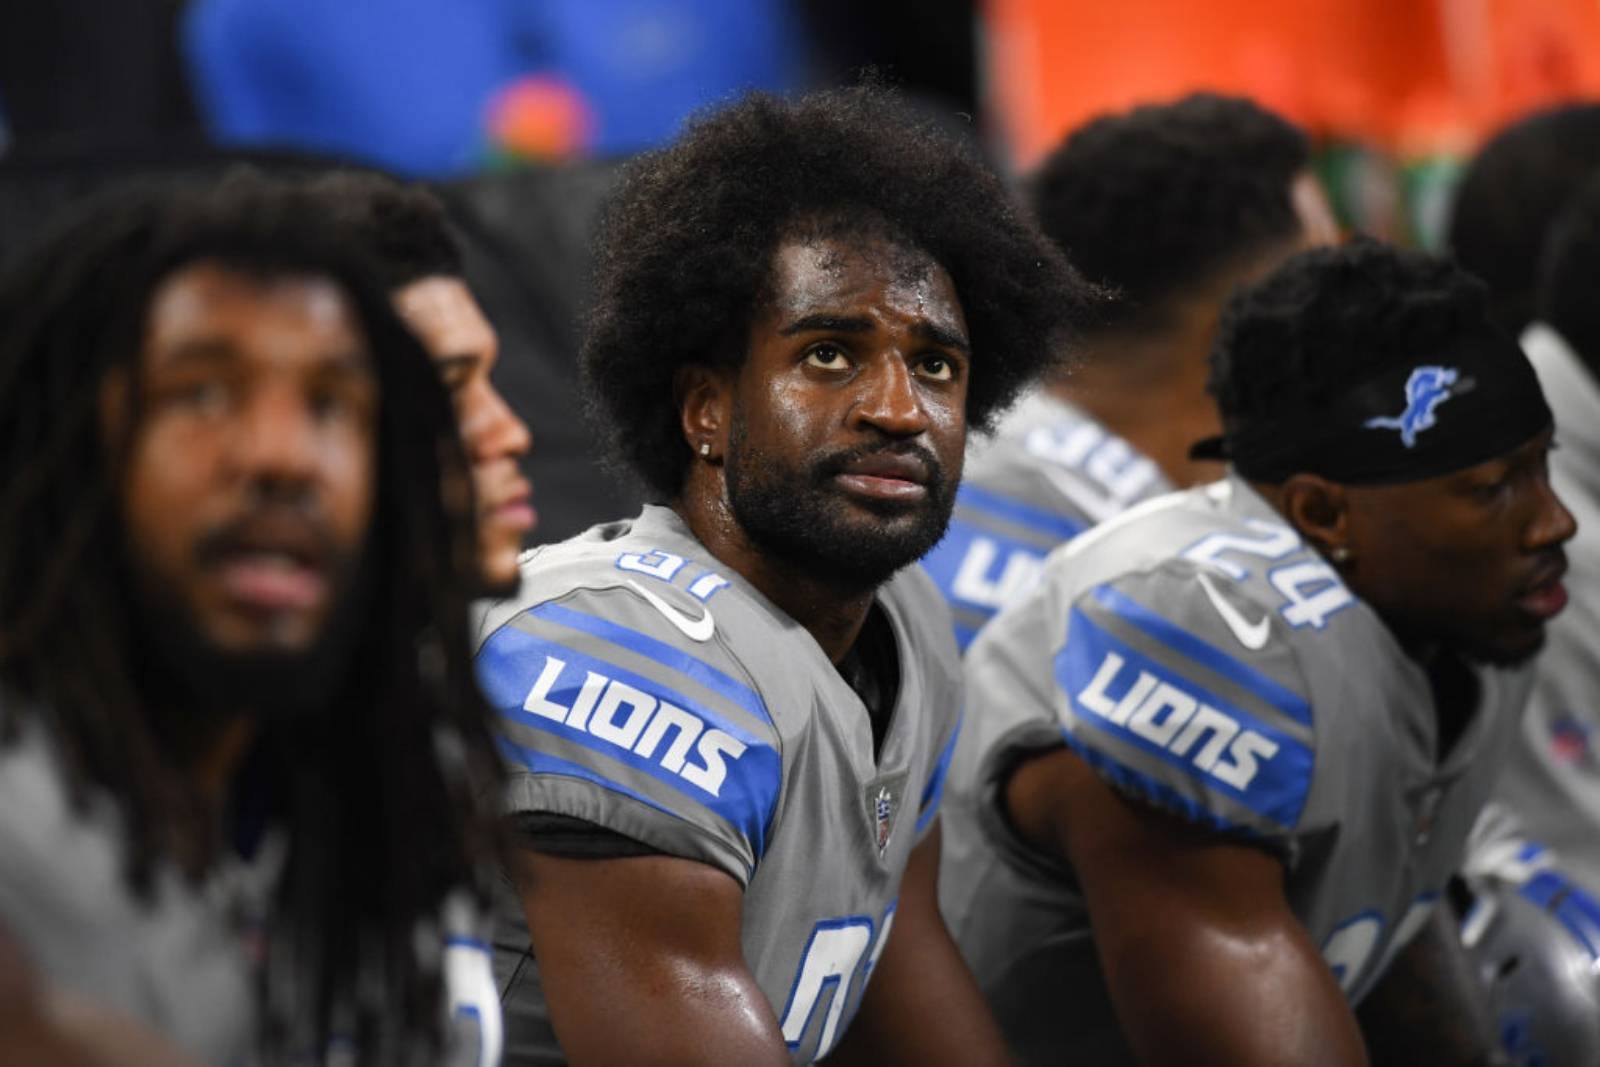 Detroit Lions defensive back D.J. Hayden (31) looks on during a game between the Chicago Bears and the Detroit Lions on December 16, 2017, at Ford Field in Detroit, MI. (Photo by Patrick Gorski/Icon Sportswire via Getty Images)